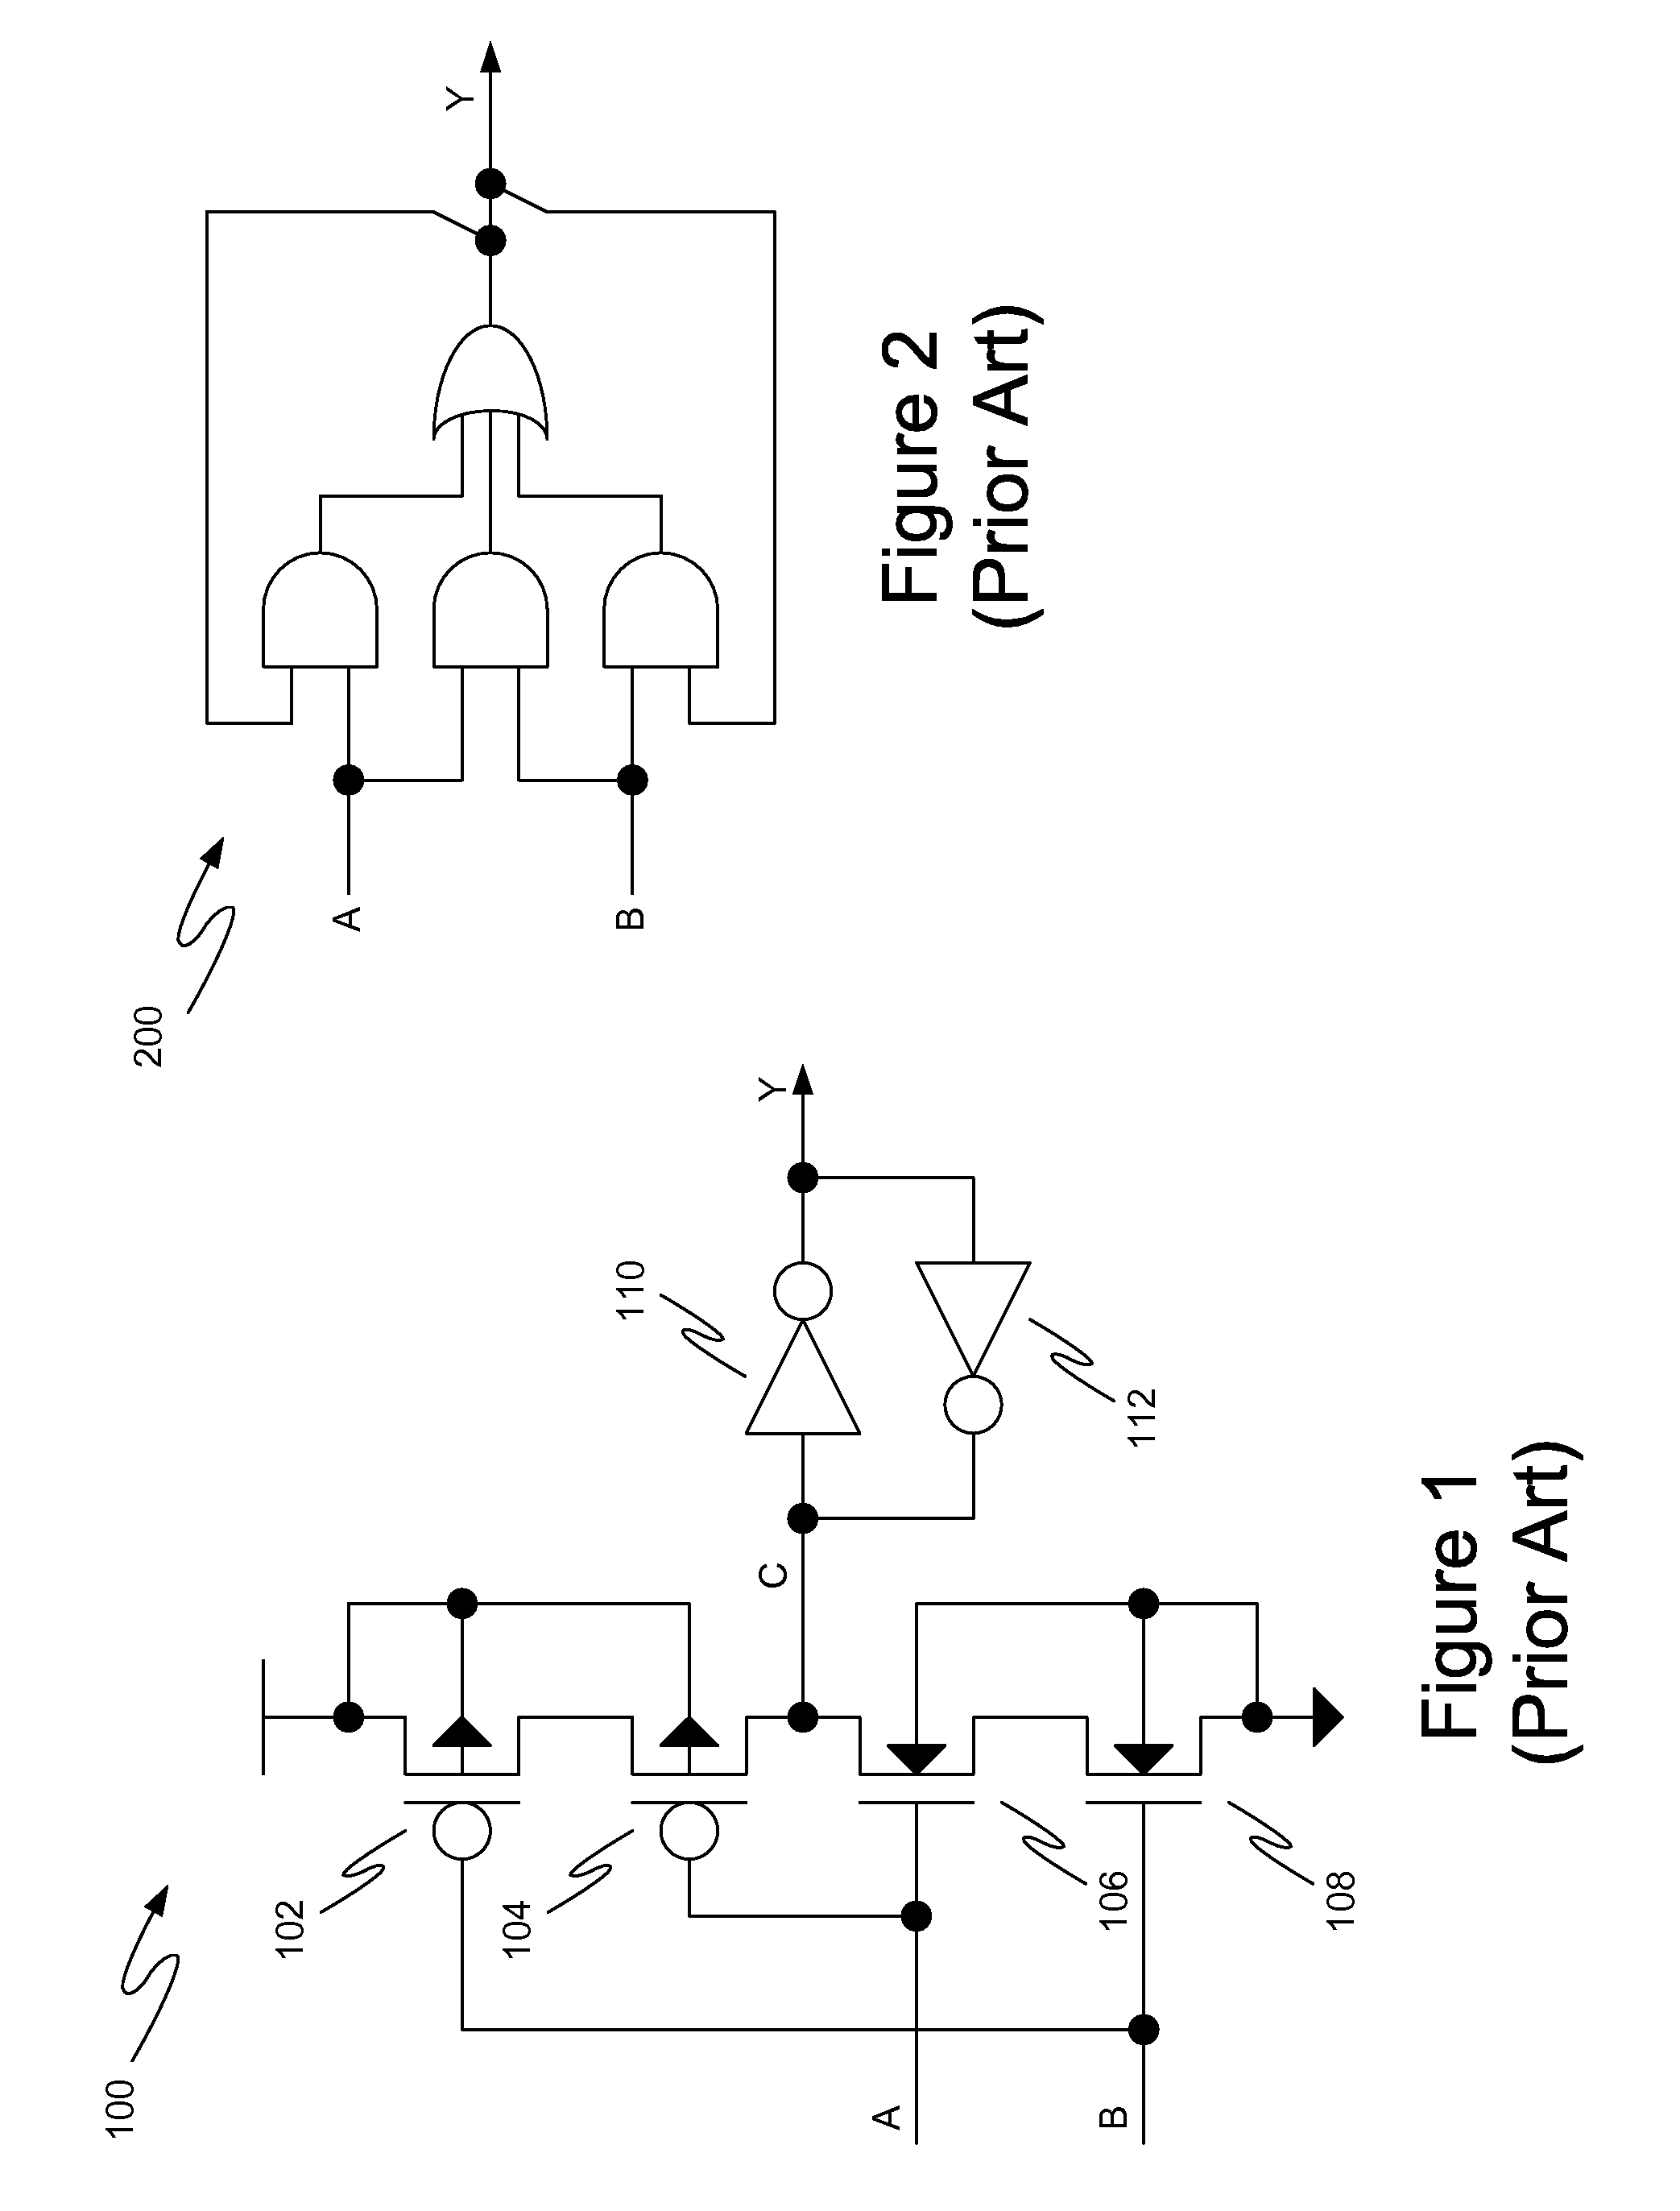 Single event transient mitigation and measurement in integrated circuits